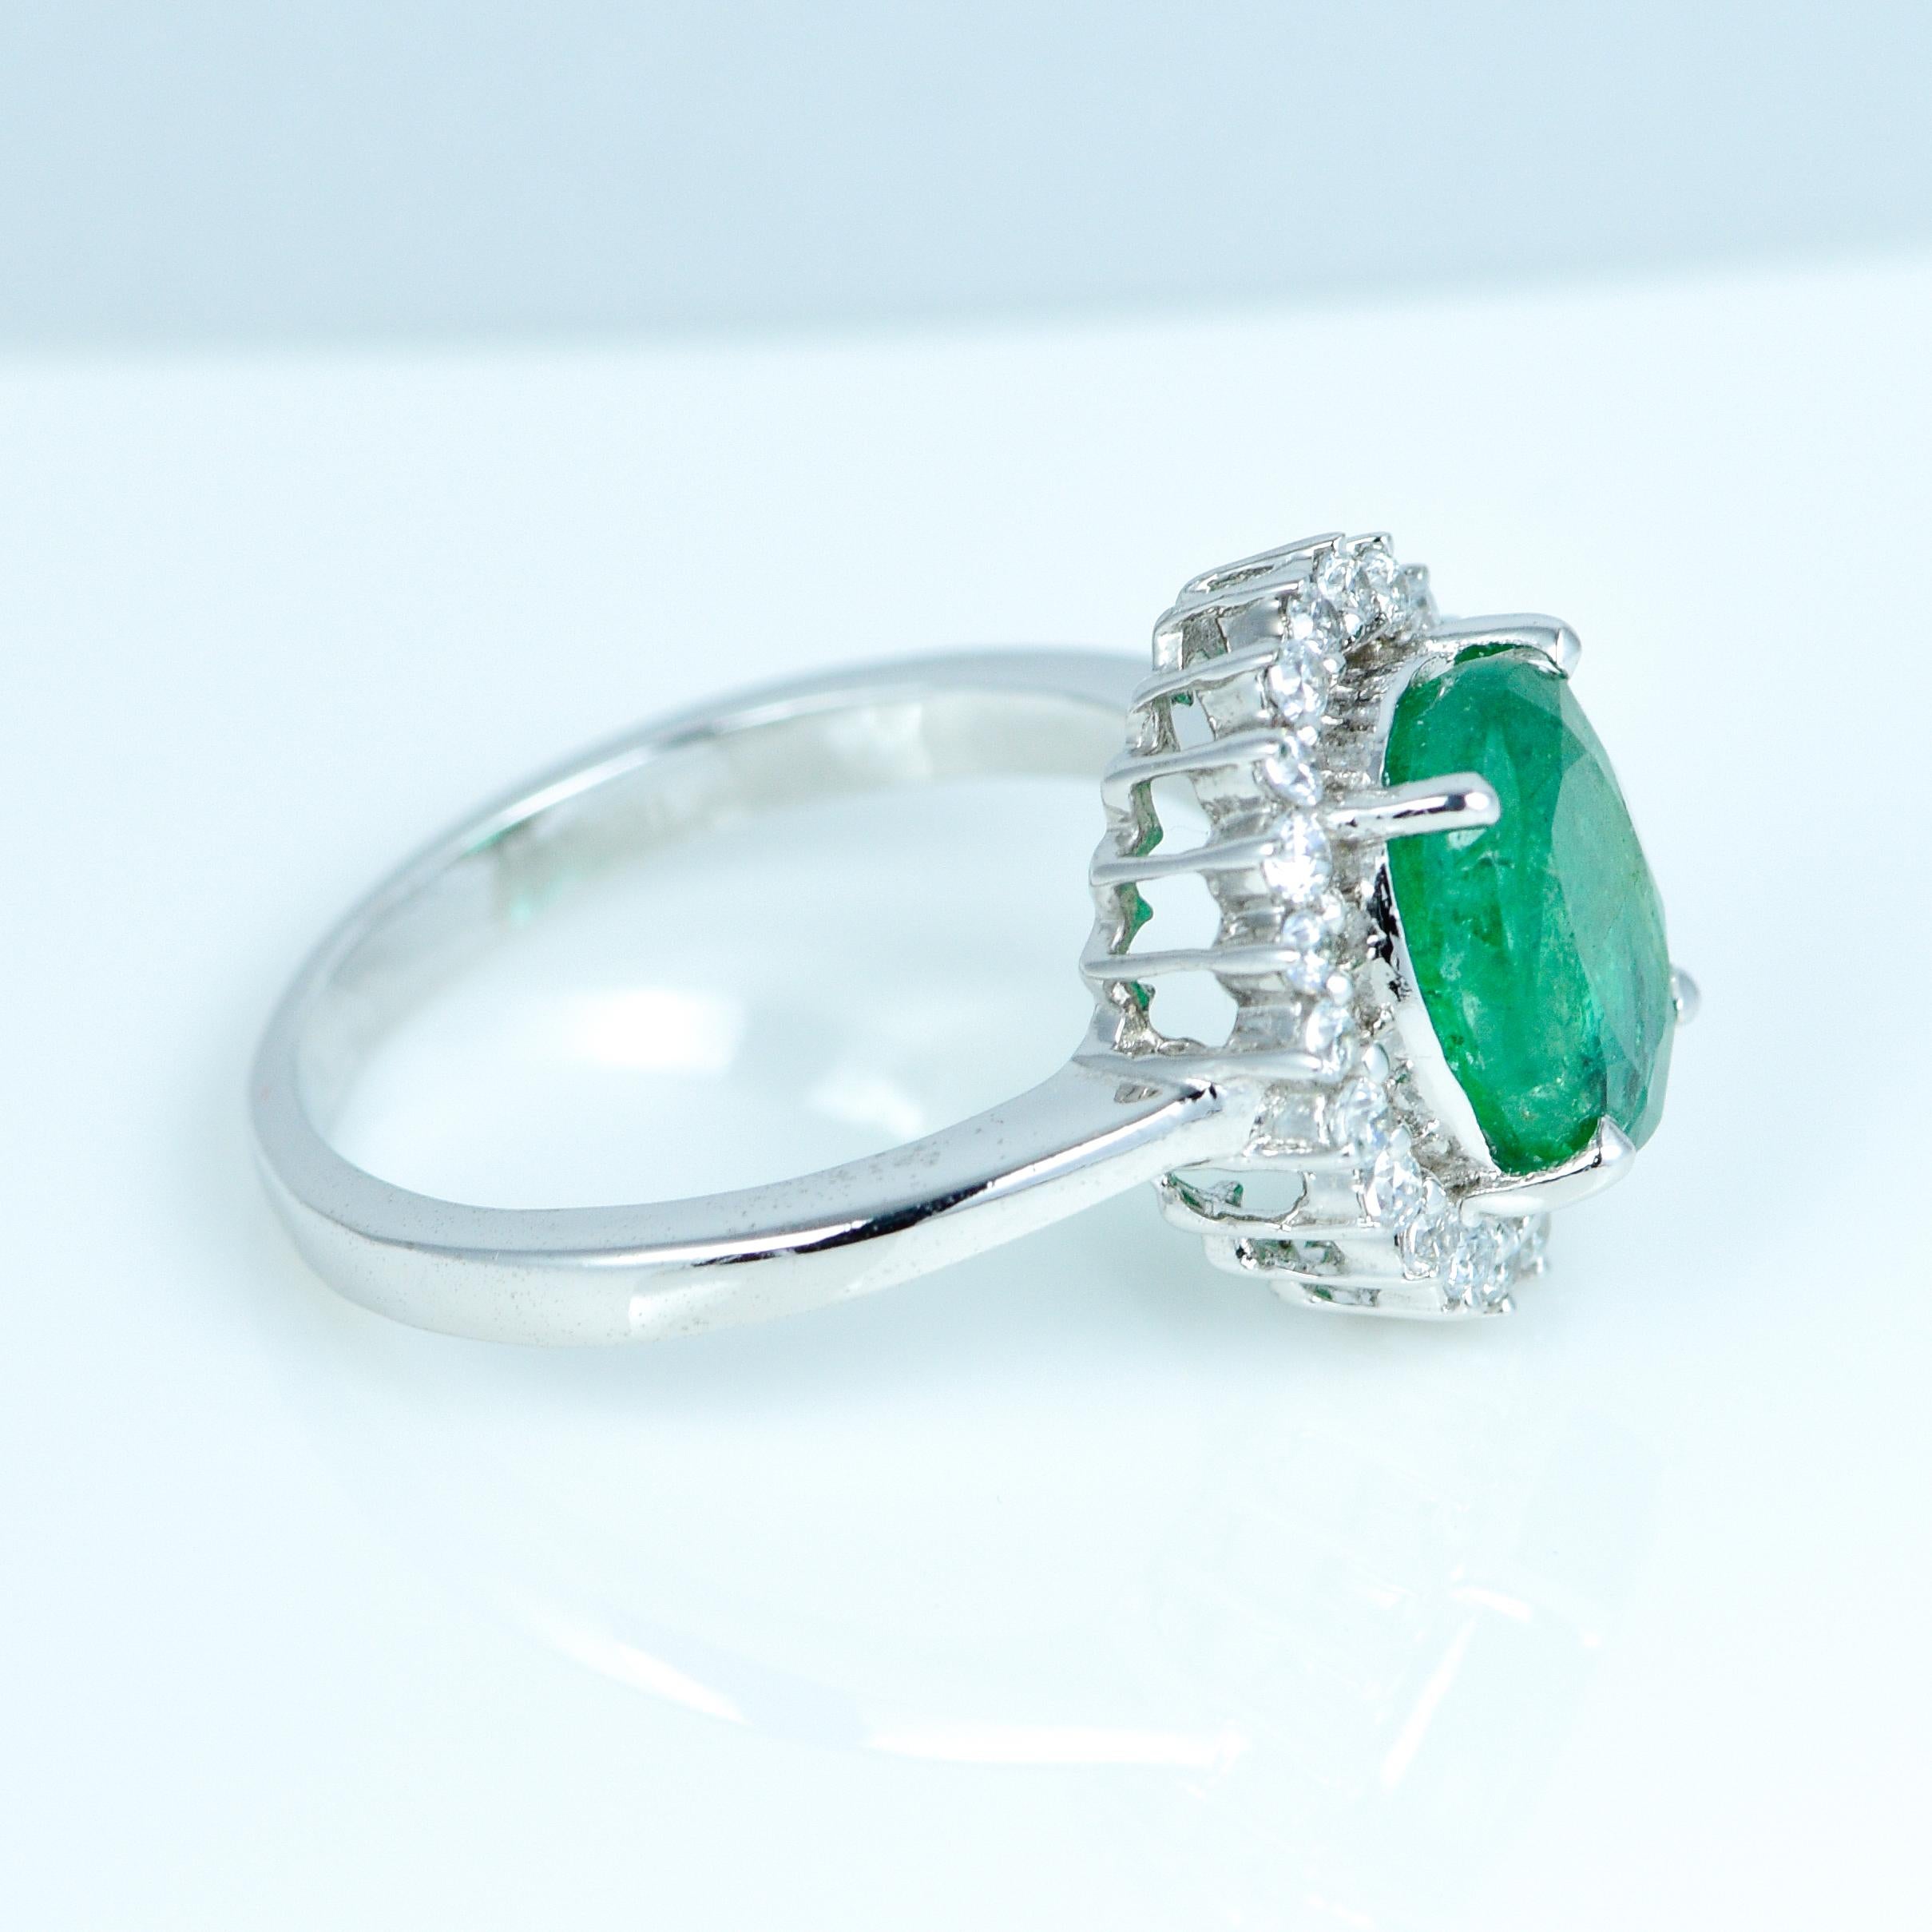 Beautiful designer ring made in silver with natural emerald and american diamonds (synthetic diamonds) and handcrafted with love. Emerald gemstone is believed to use for increasing the peace of mind and ability to learn.

Product Details:

Metal -